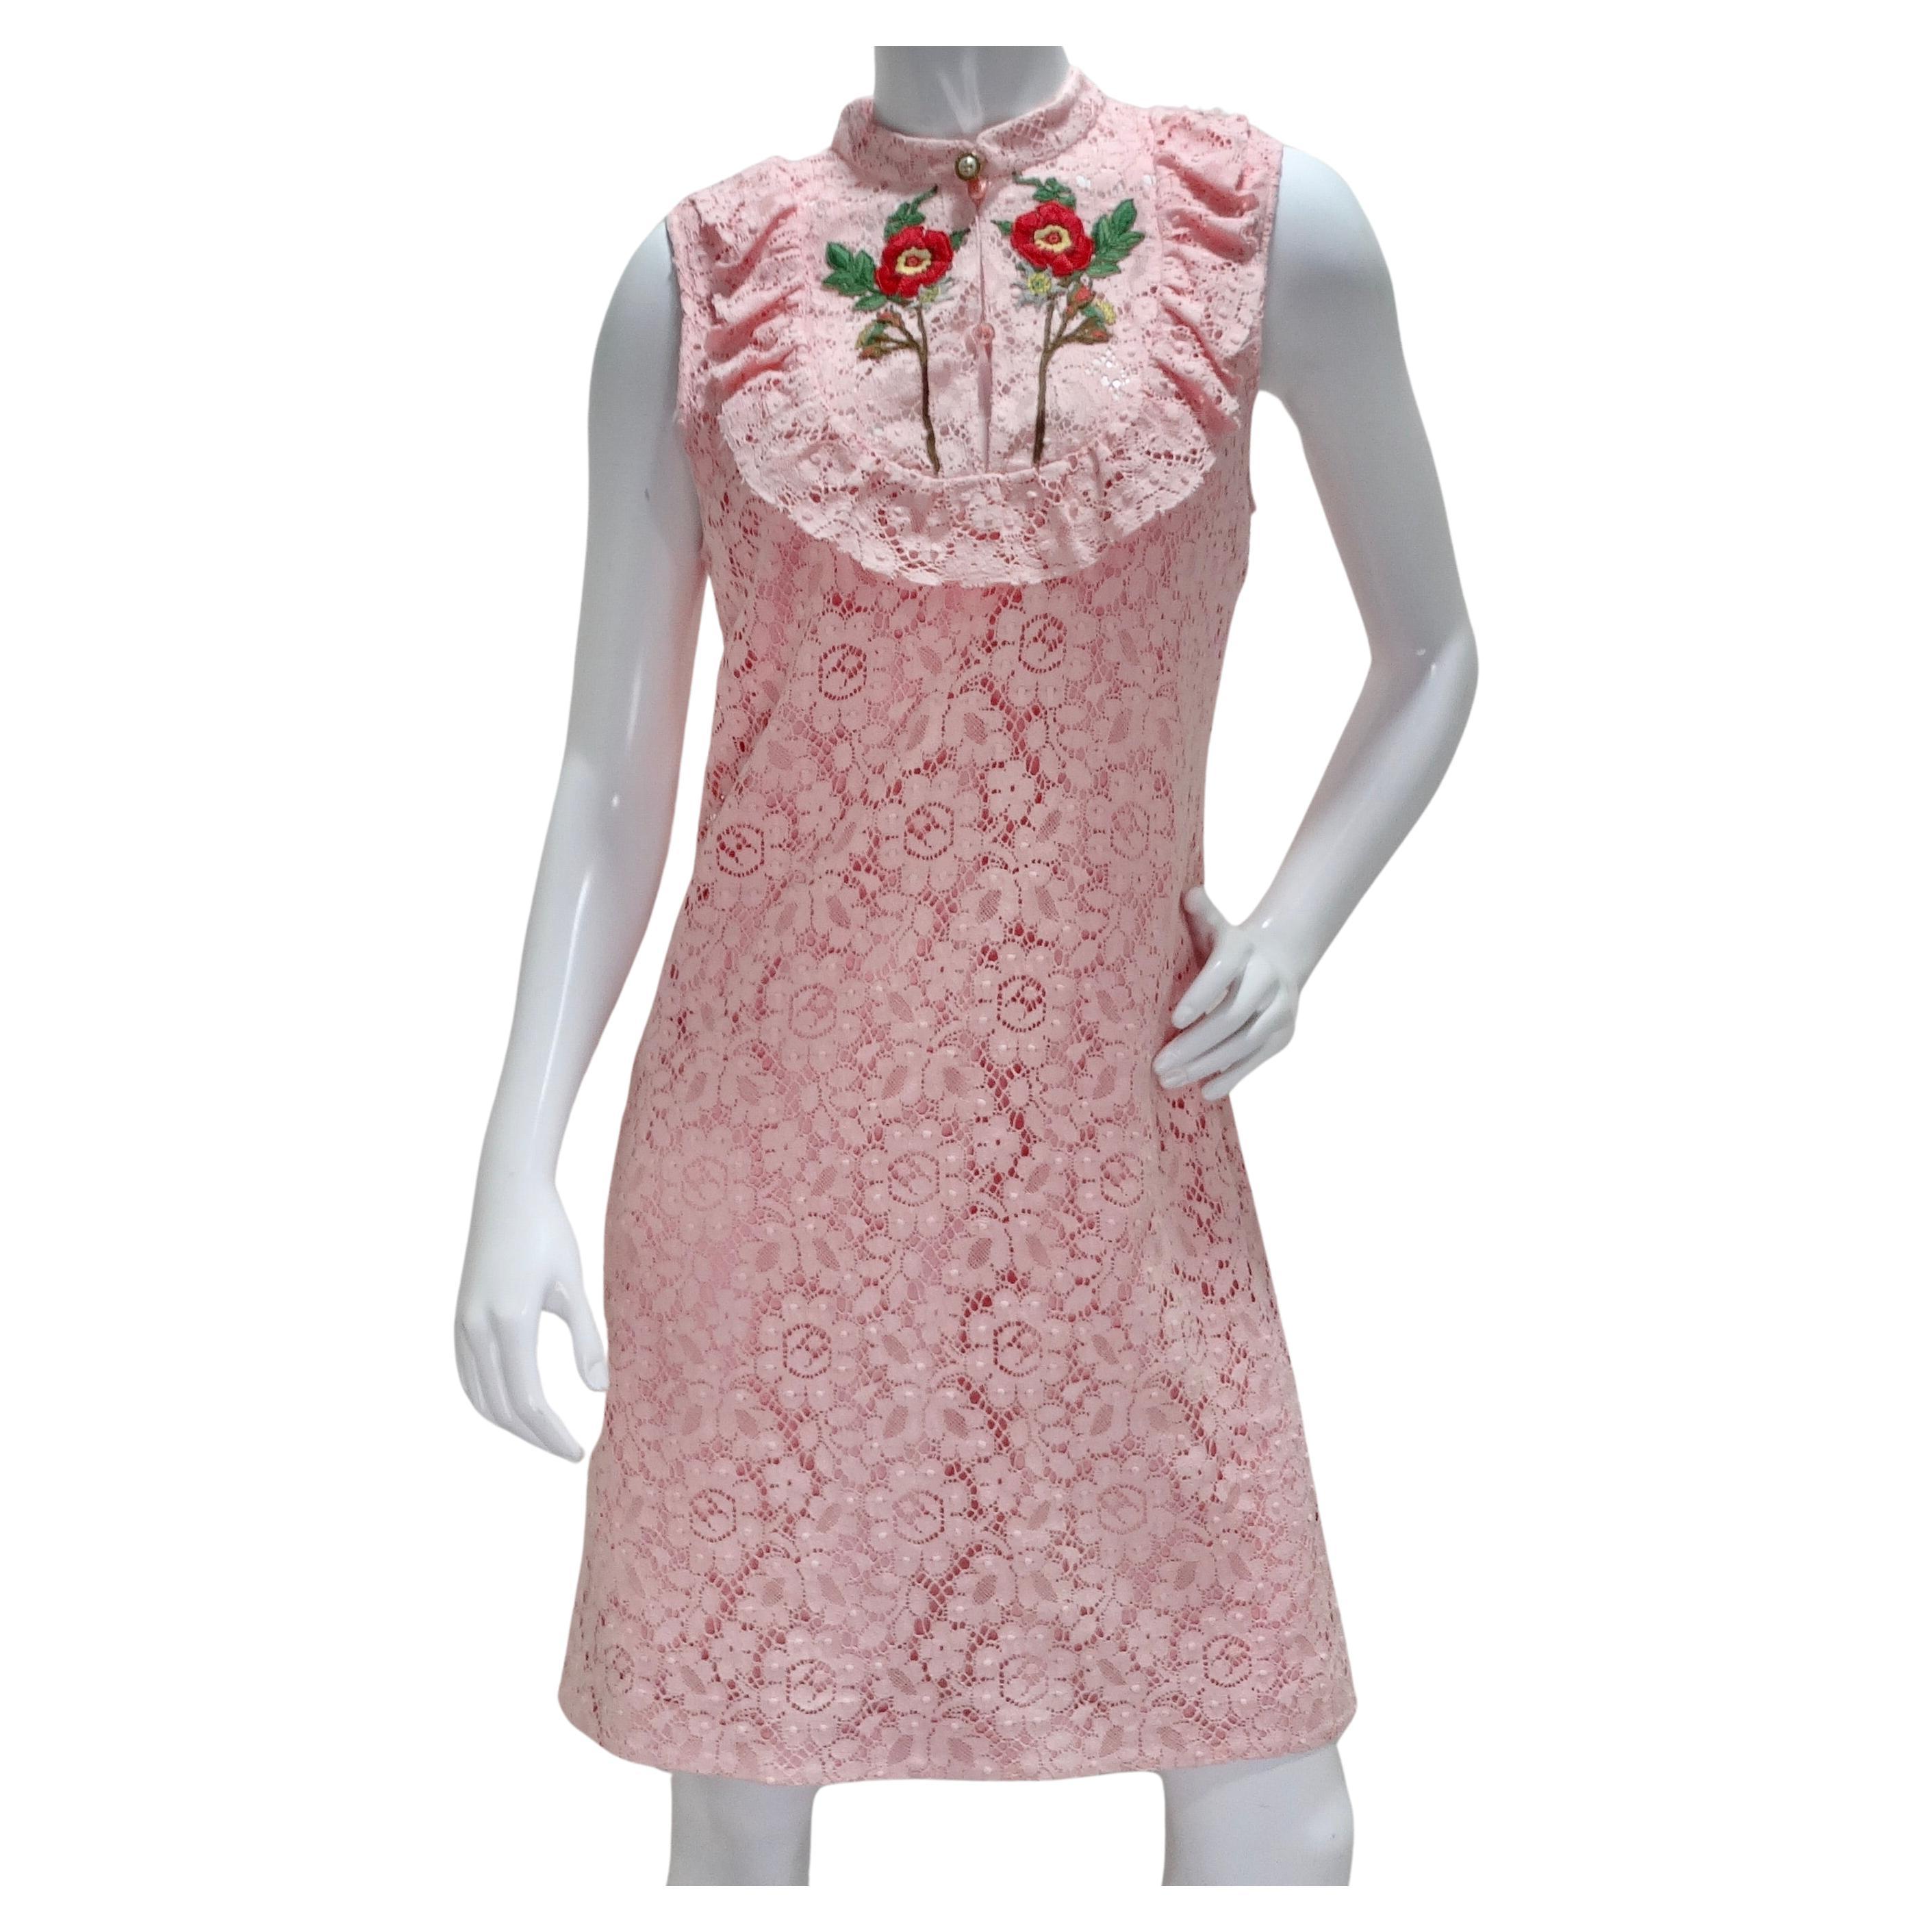 Gucci Cluny Lace Dress in Rose